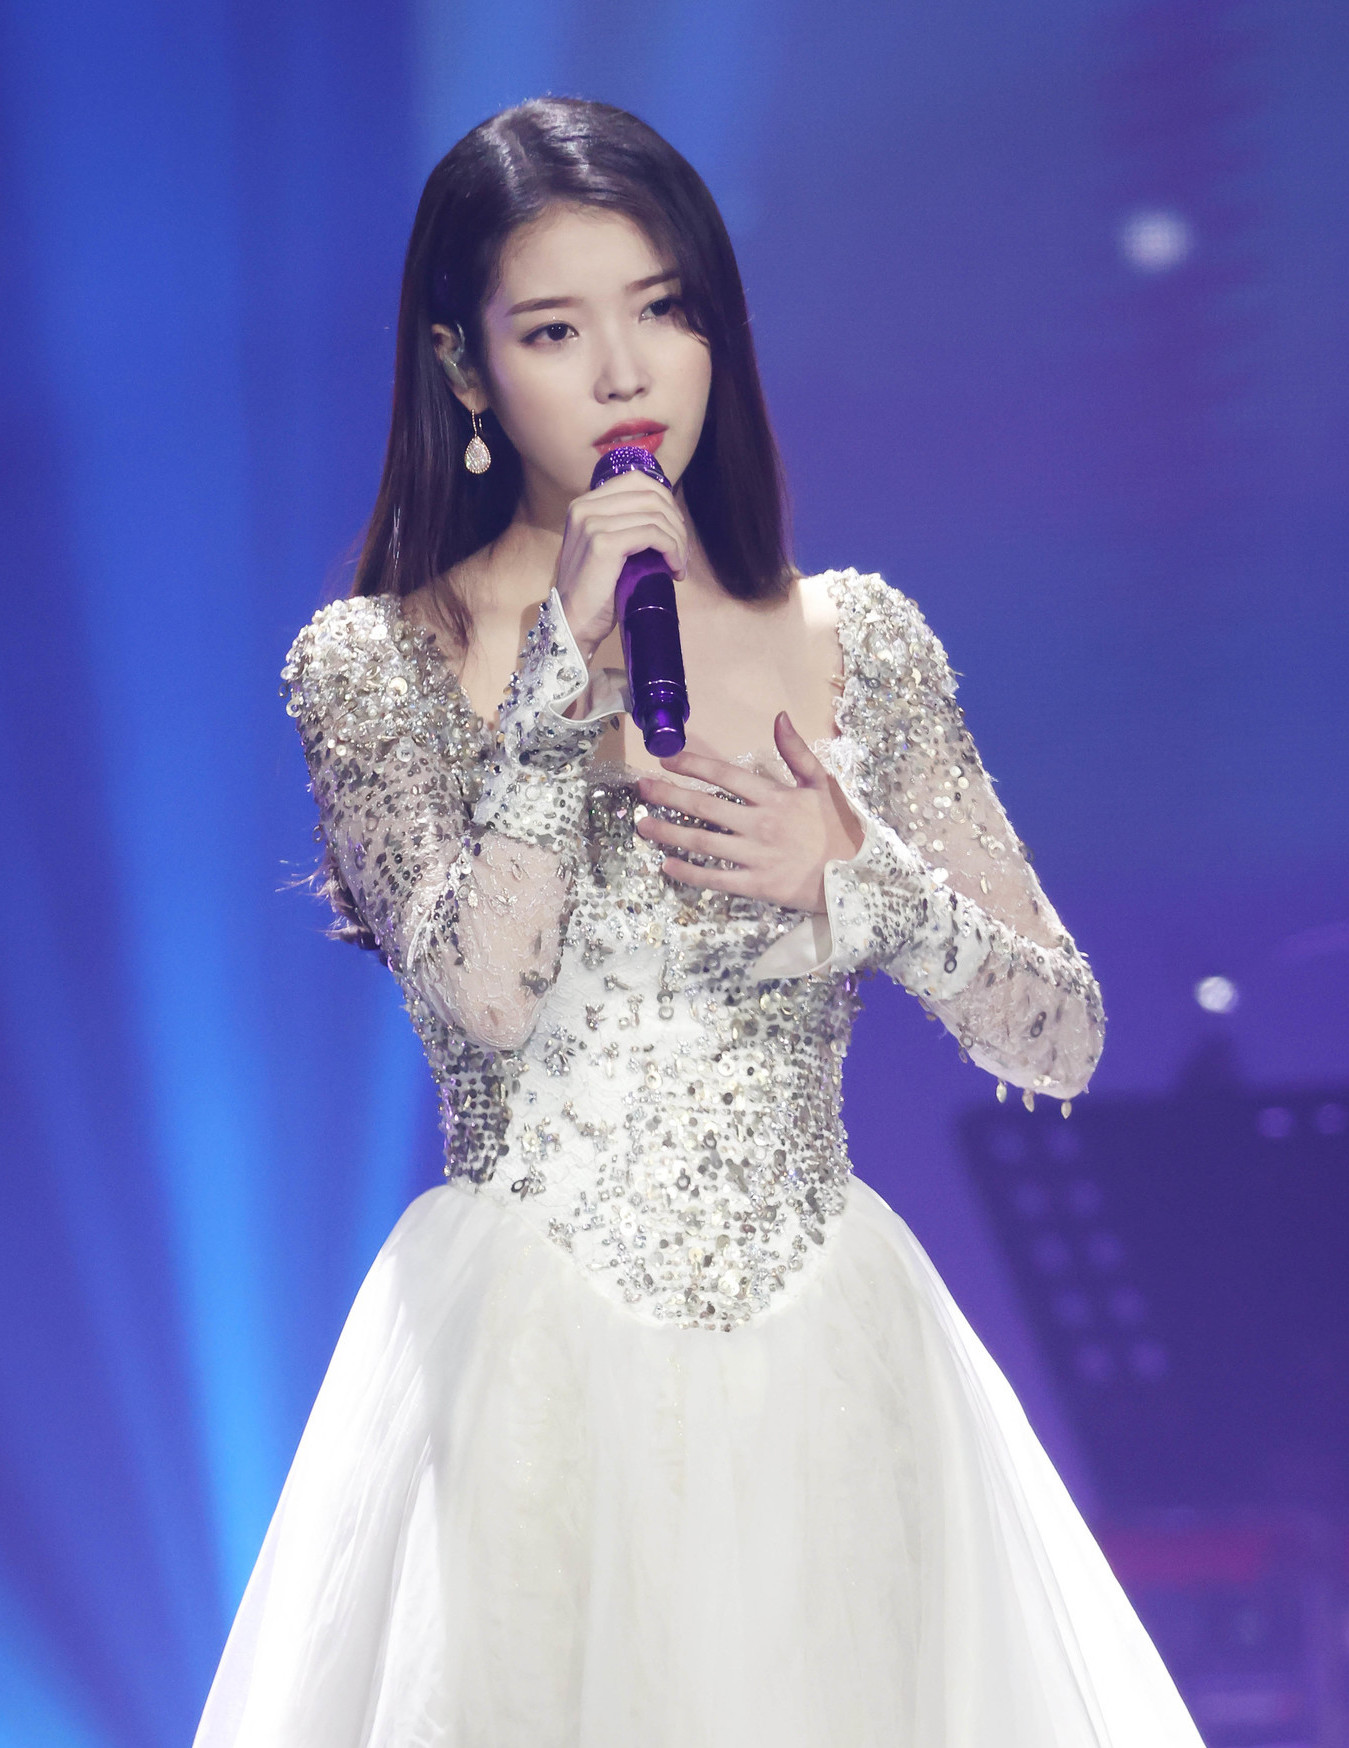 Seven Reasons For Disney To Cast IU As One Of Their Princesses